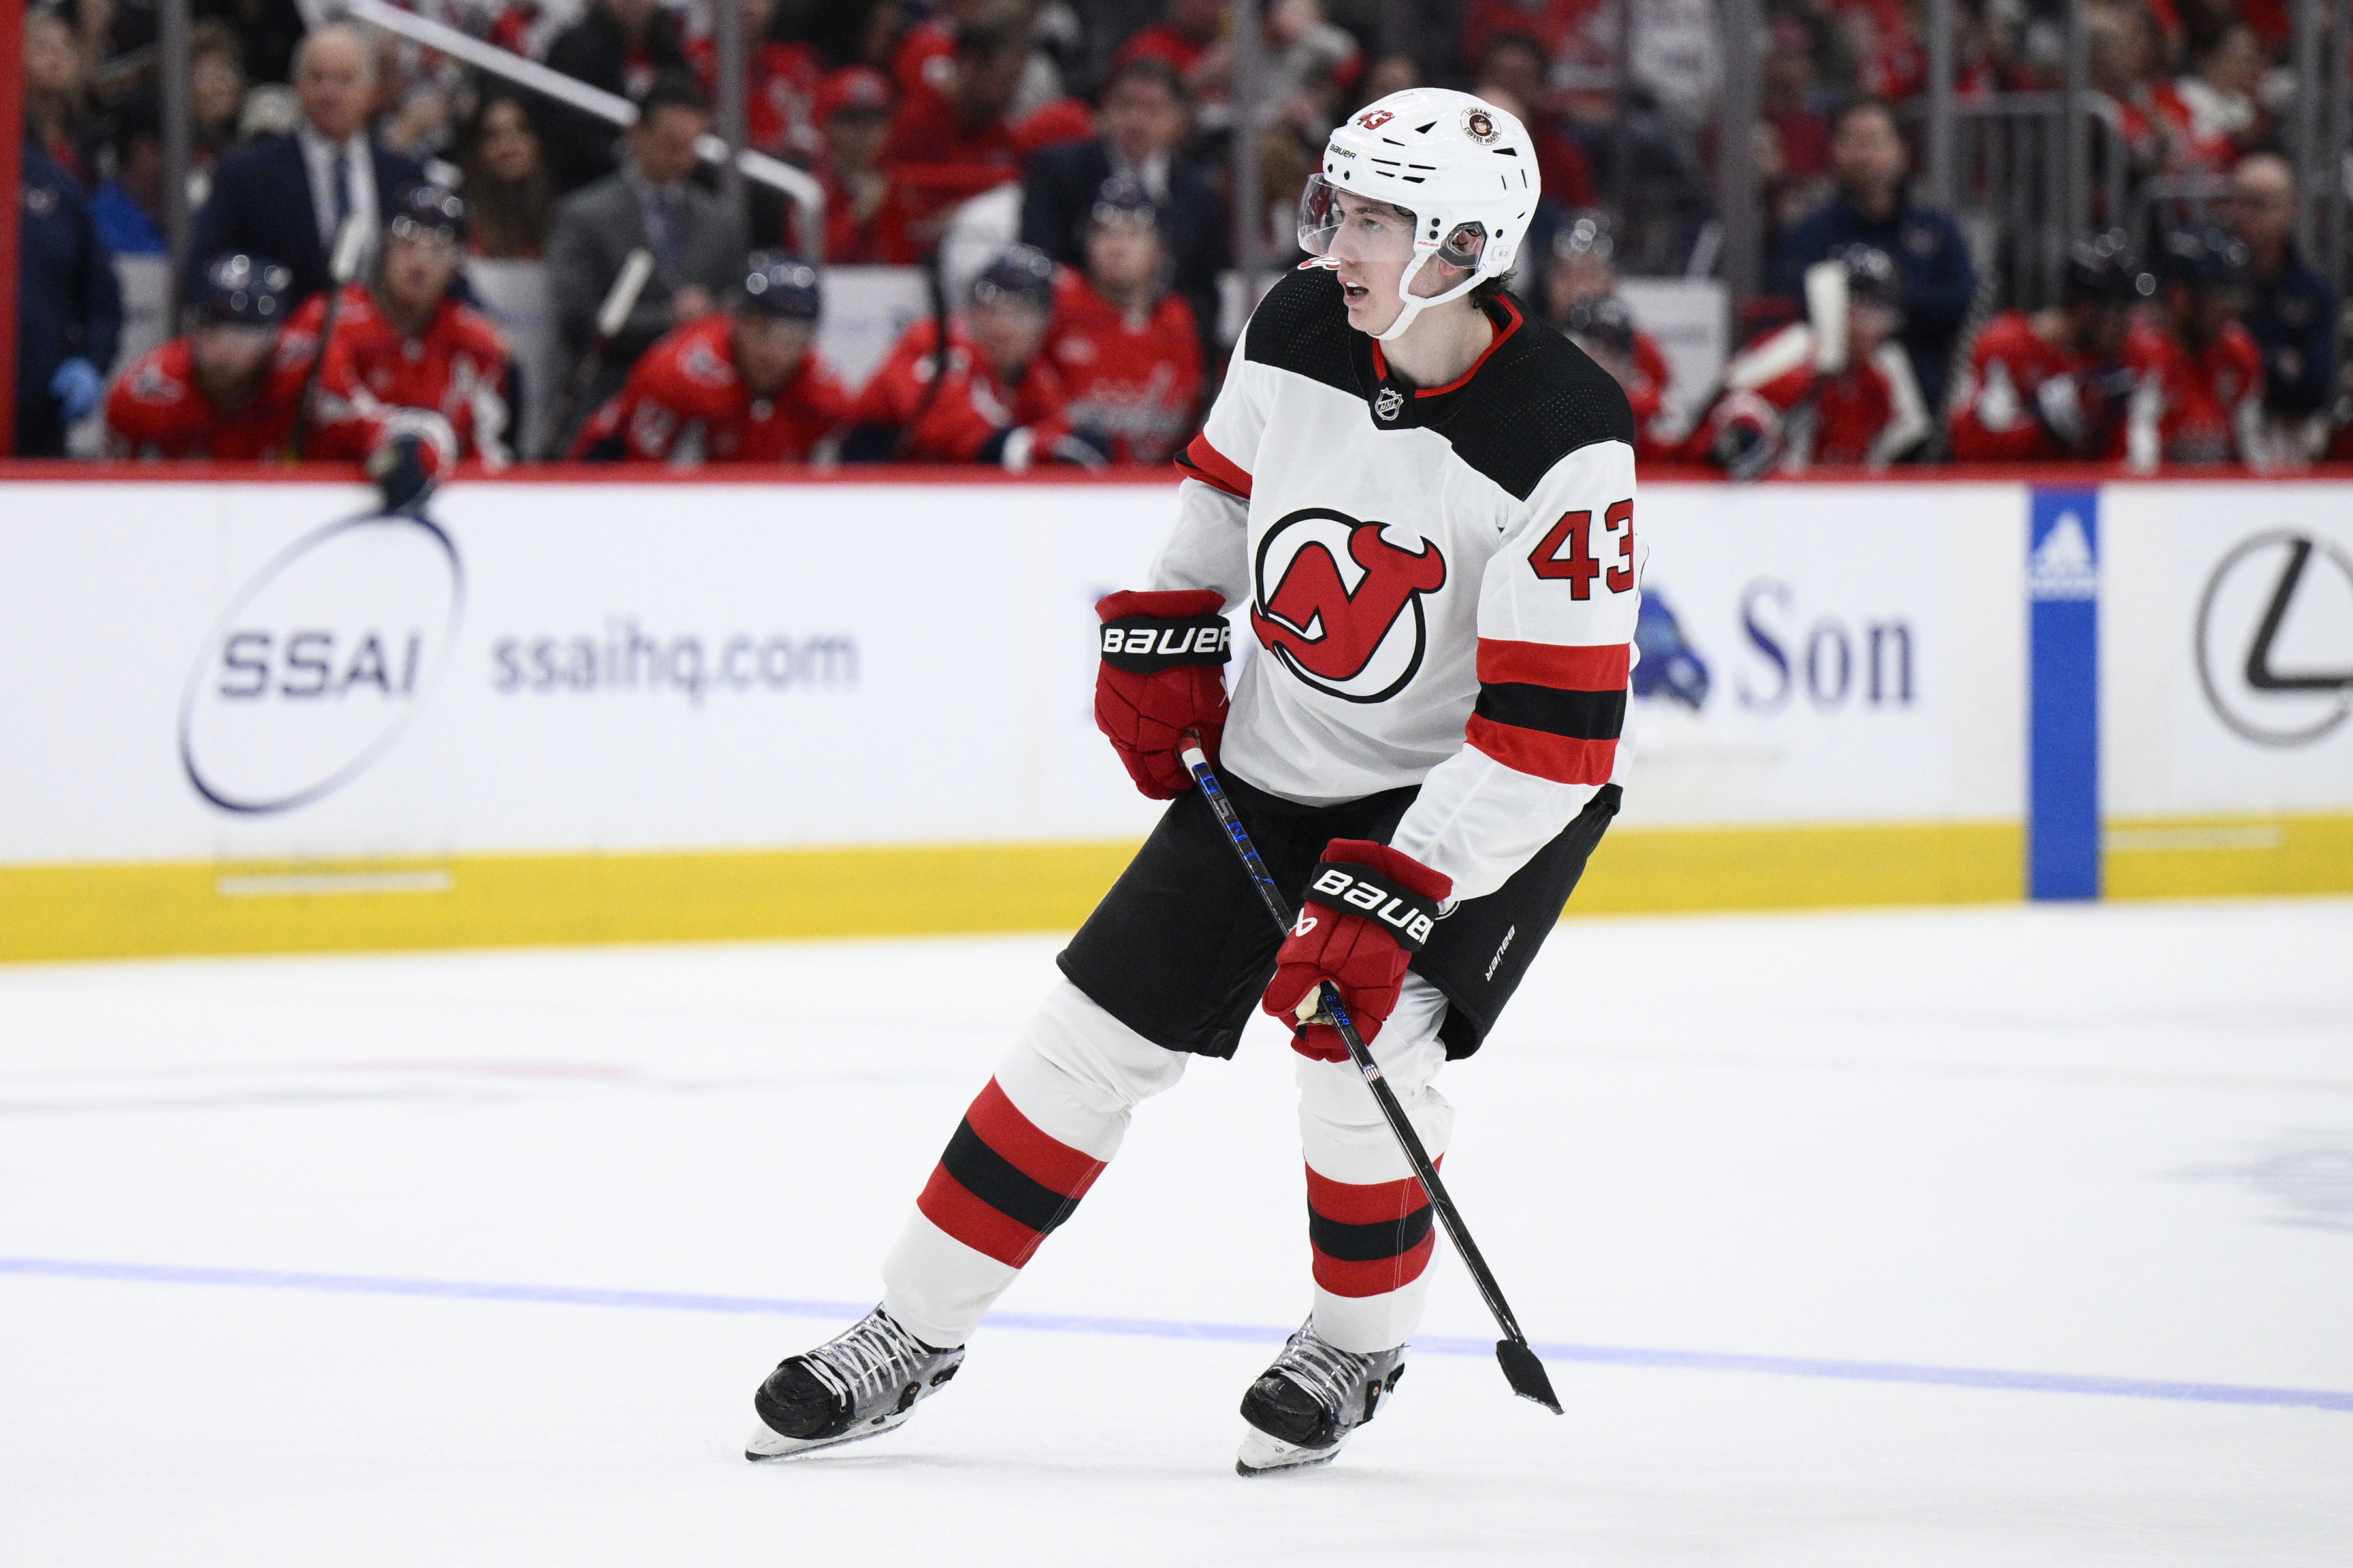 Luke Hughes New Jersey Devils 4th Overall Pick In The 2021 Draft 4